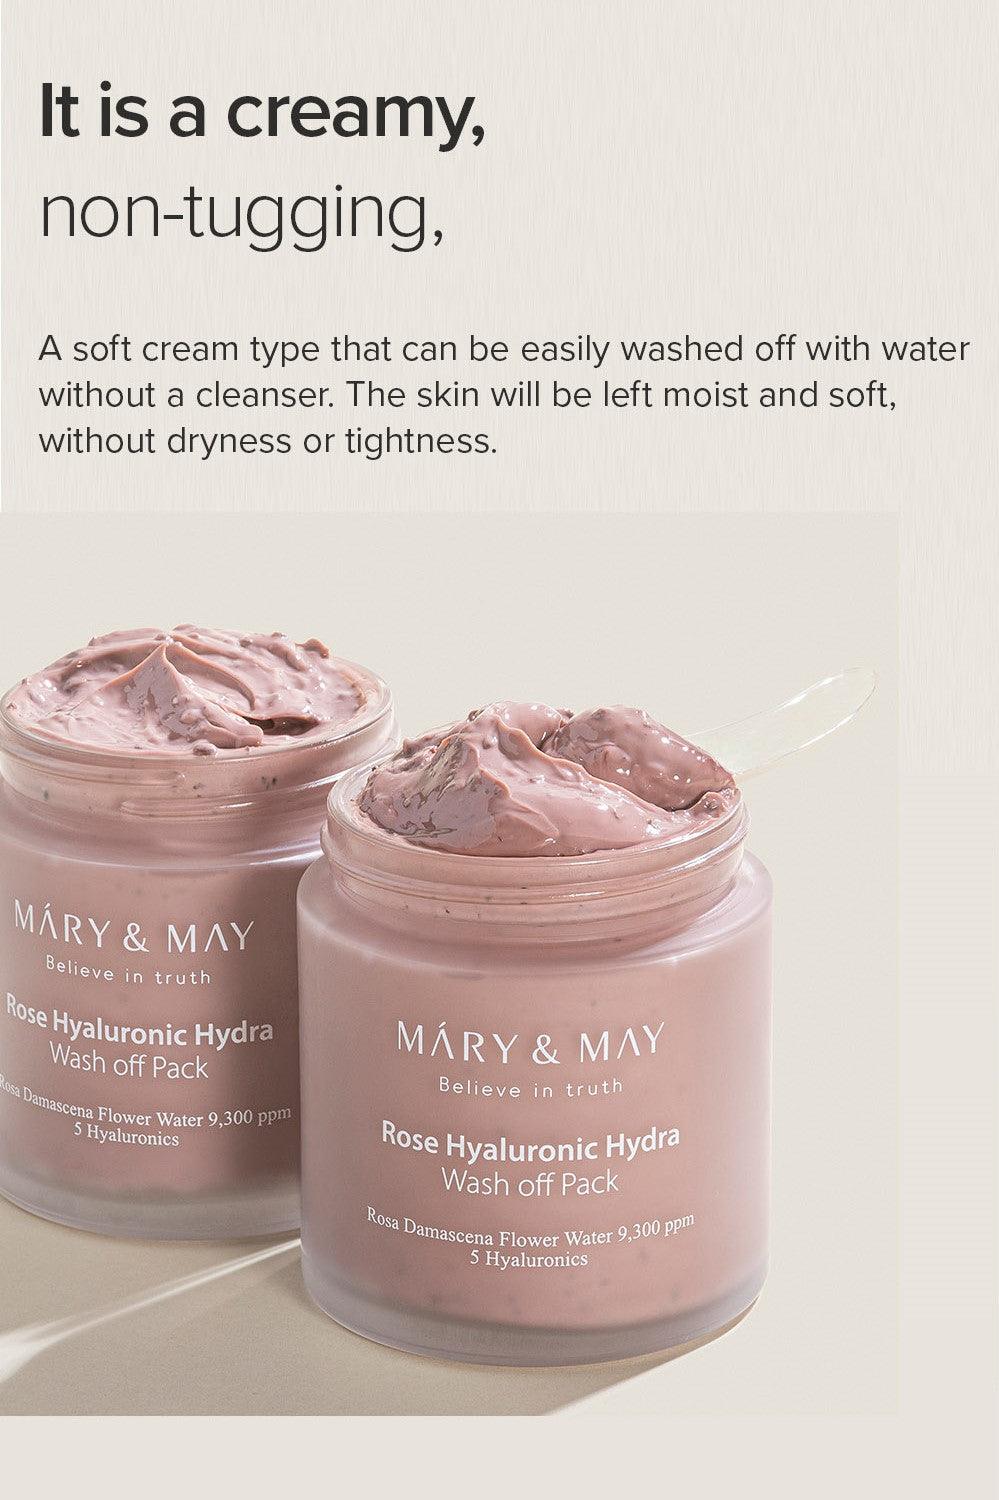 [MARY&MAY] Rose Hyaluronic Hydra Wash Off Pack 125g - KBeauti